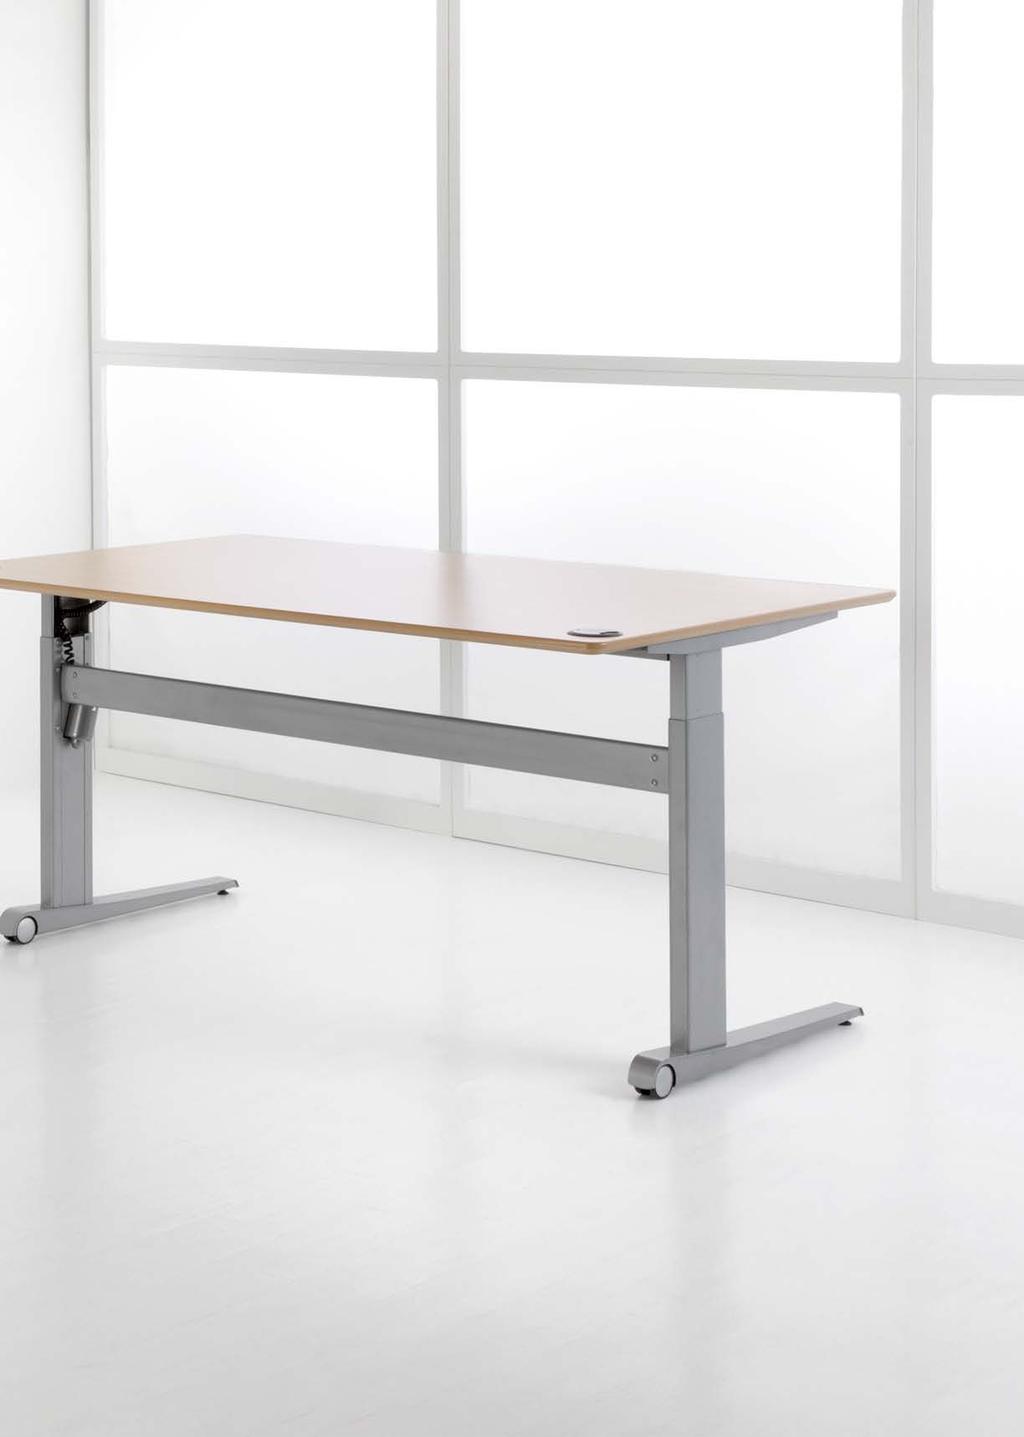 501-17 501-17 A modern desk table The 501-17 has a light design with 80 kg frame lifting capacity and has new unique characteristics for height adjustable tables.